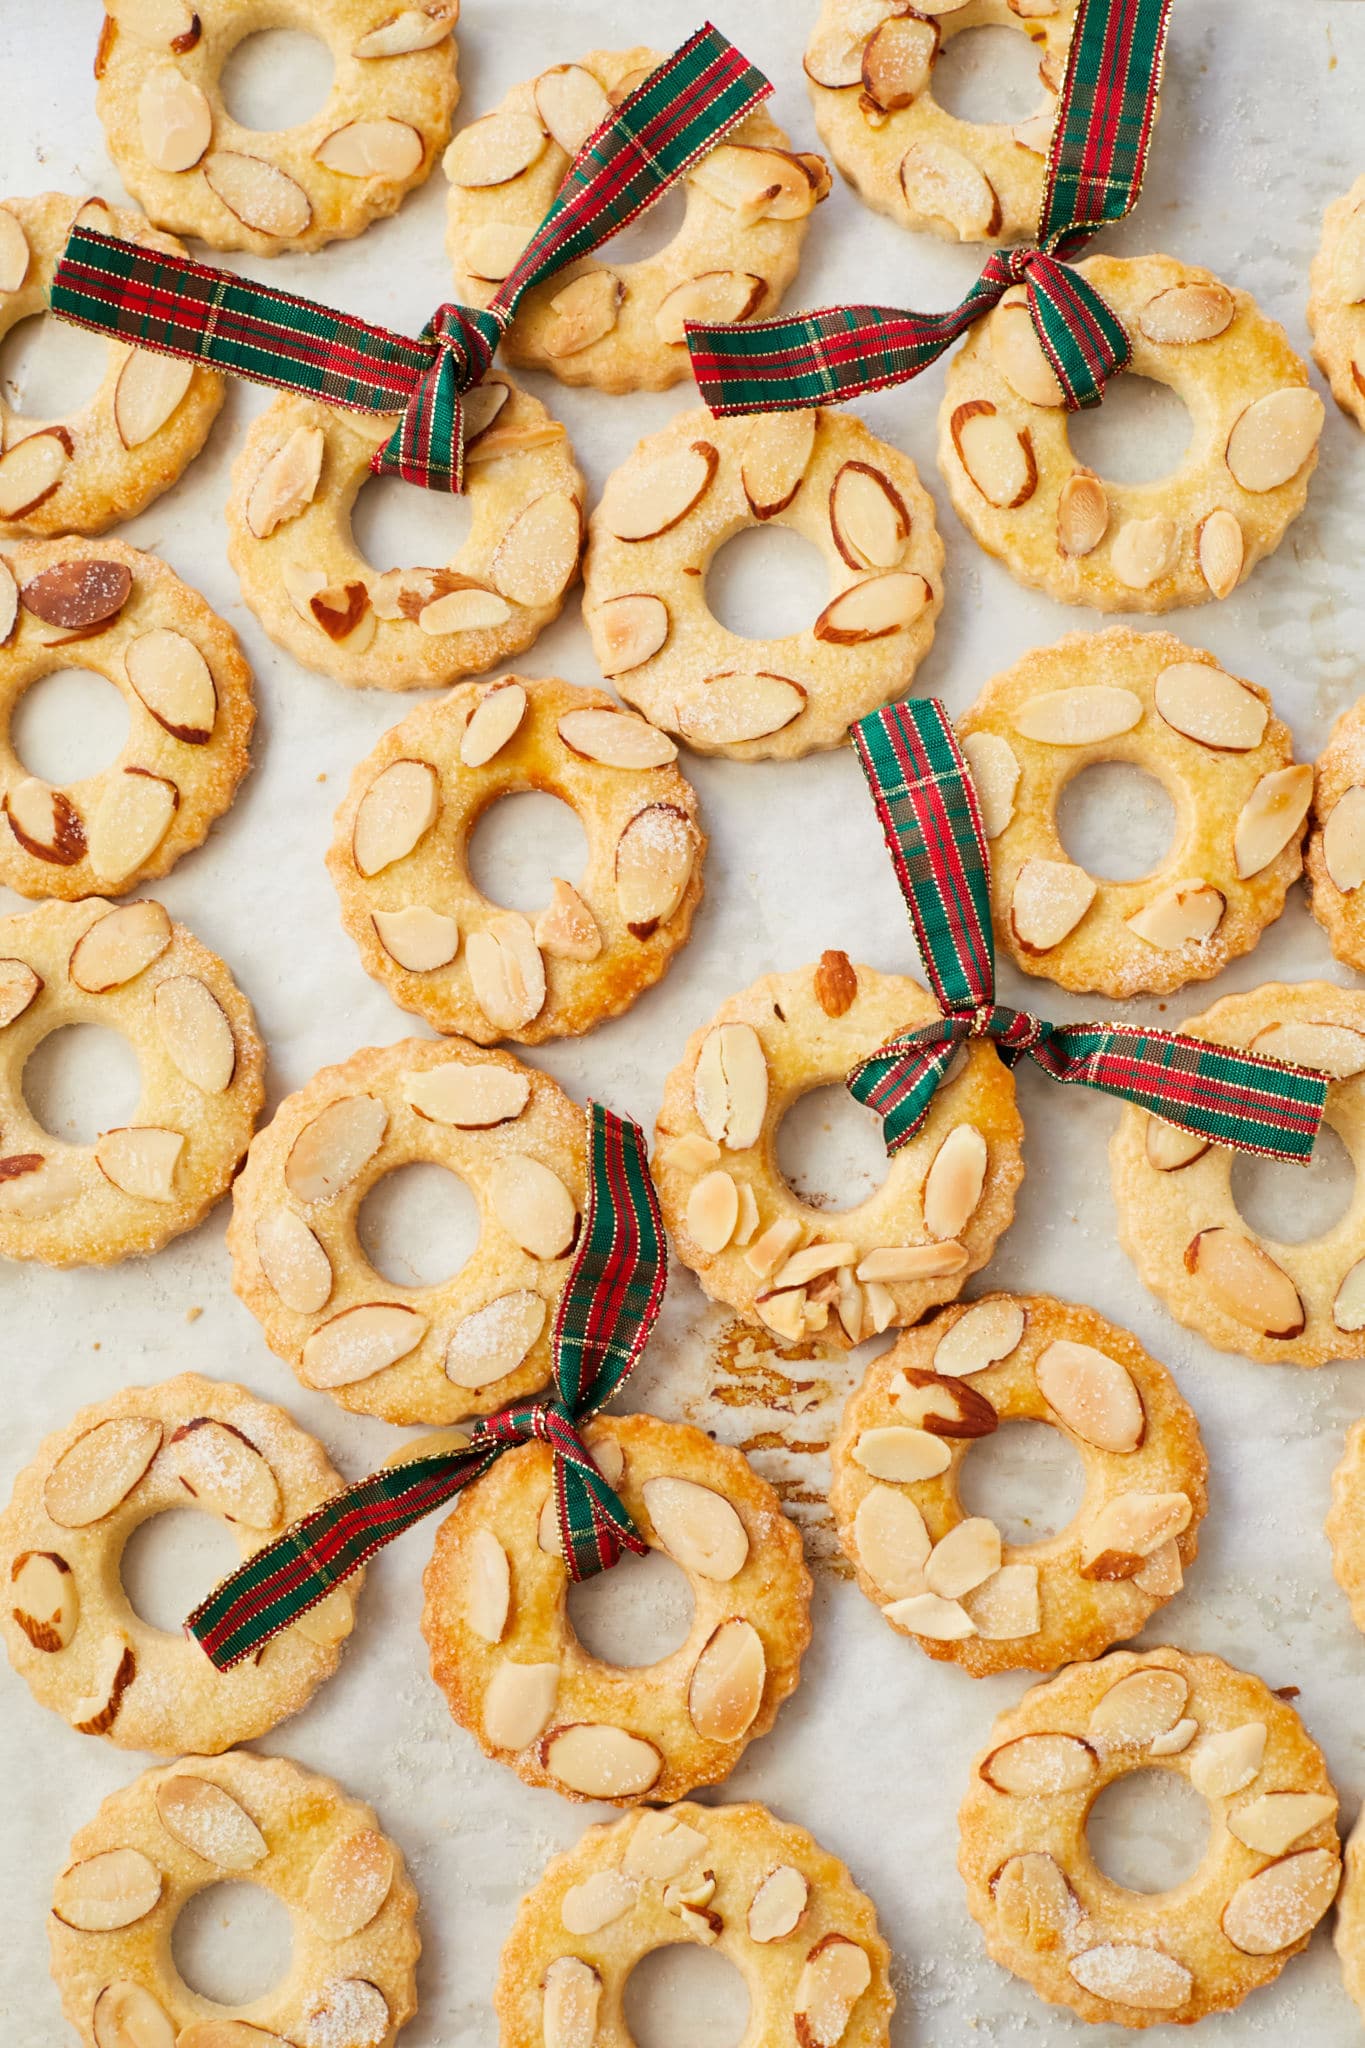 Homemade Dutch Kerstkransjes cookies on parchment paper. The traditional Dutch cookies are decorated with sliced almonds and some have a bow tied around them like a wreath. 